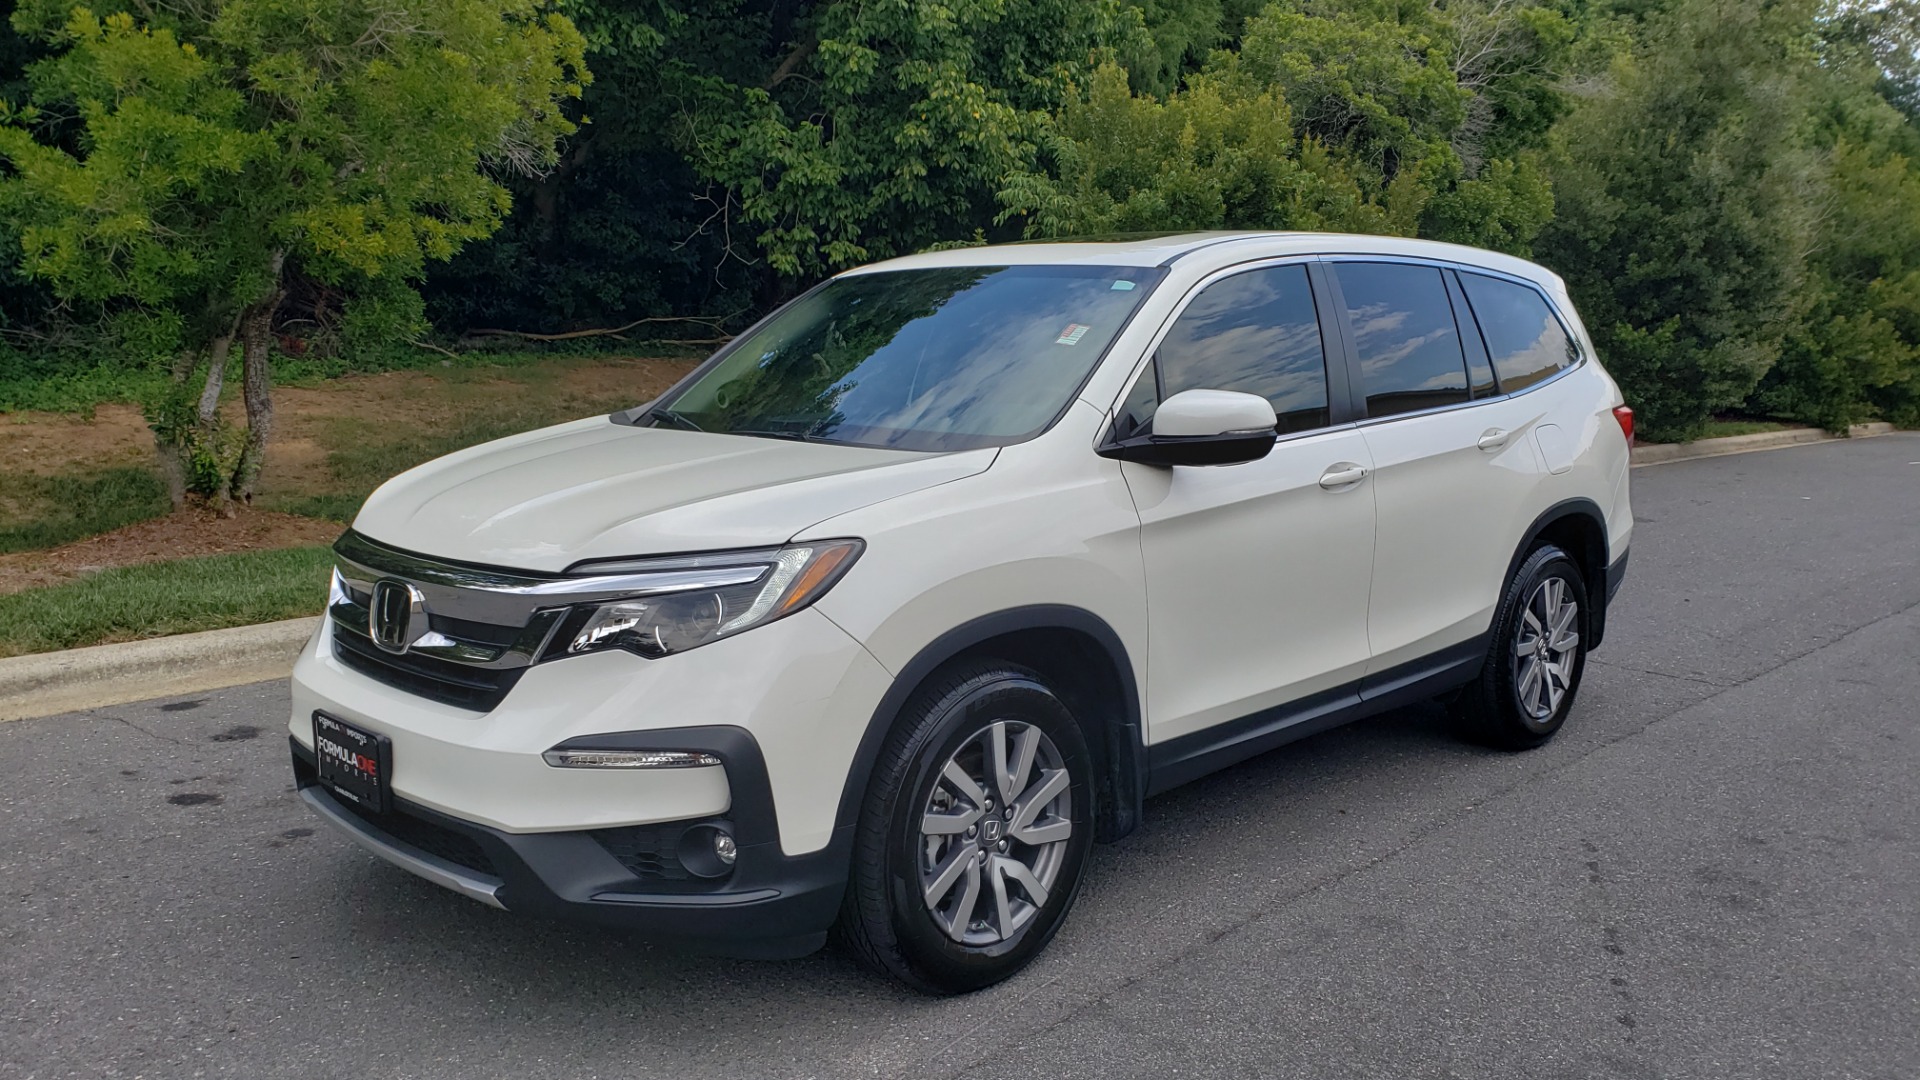 Used 2019 Honda PILOT EX-L / V6 / NAV / SUNROOF / DVD / 3-ROW / REARVIEW for sale Sold at Formula Imports in Charlotte NC 28227 1